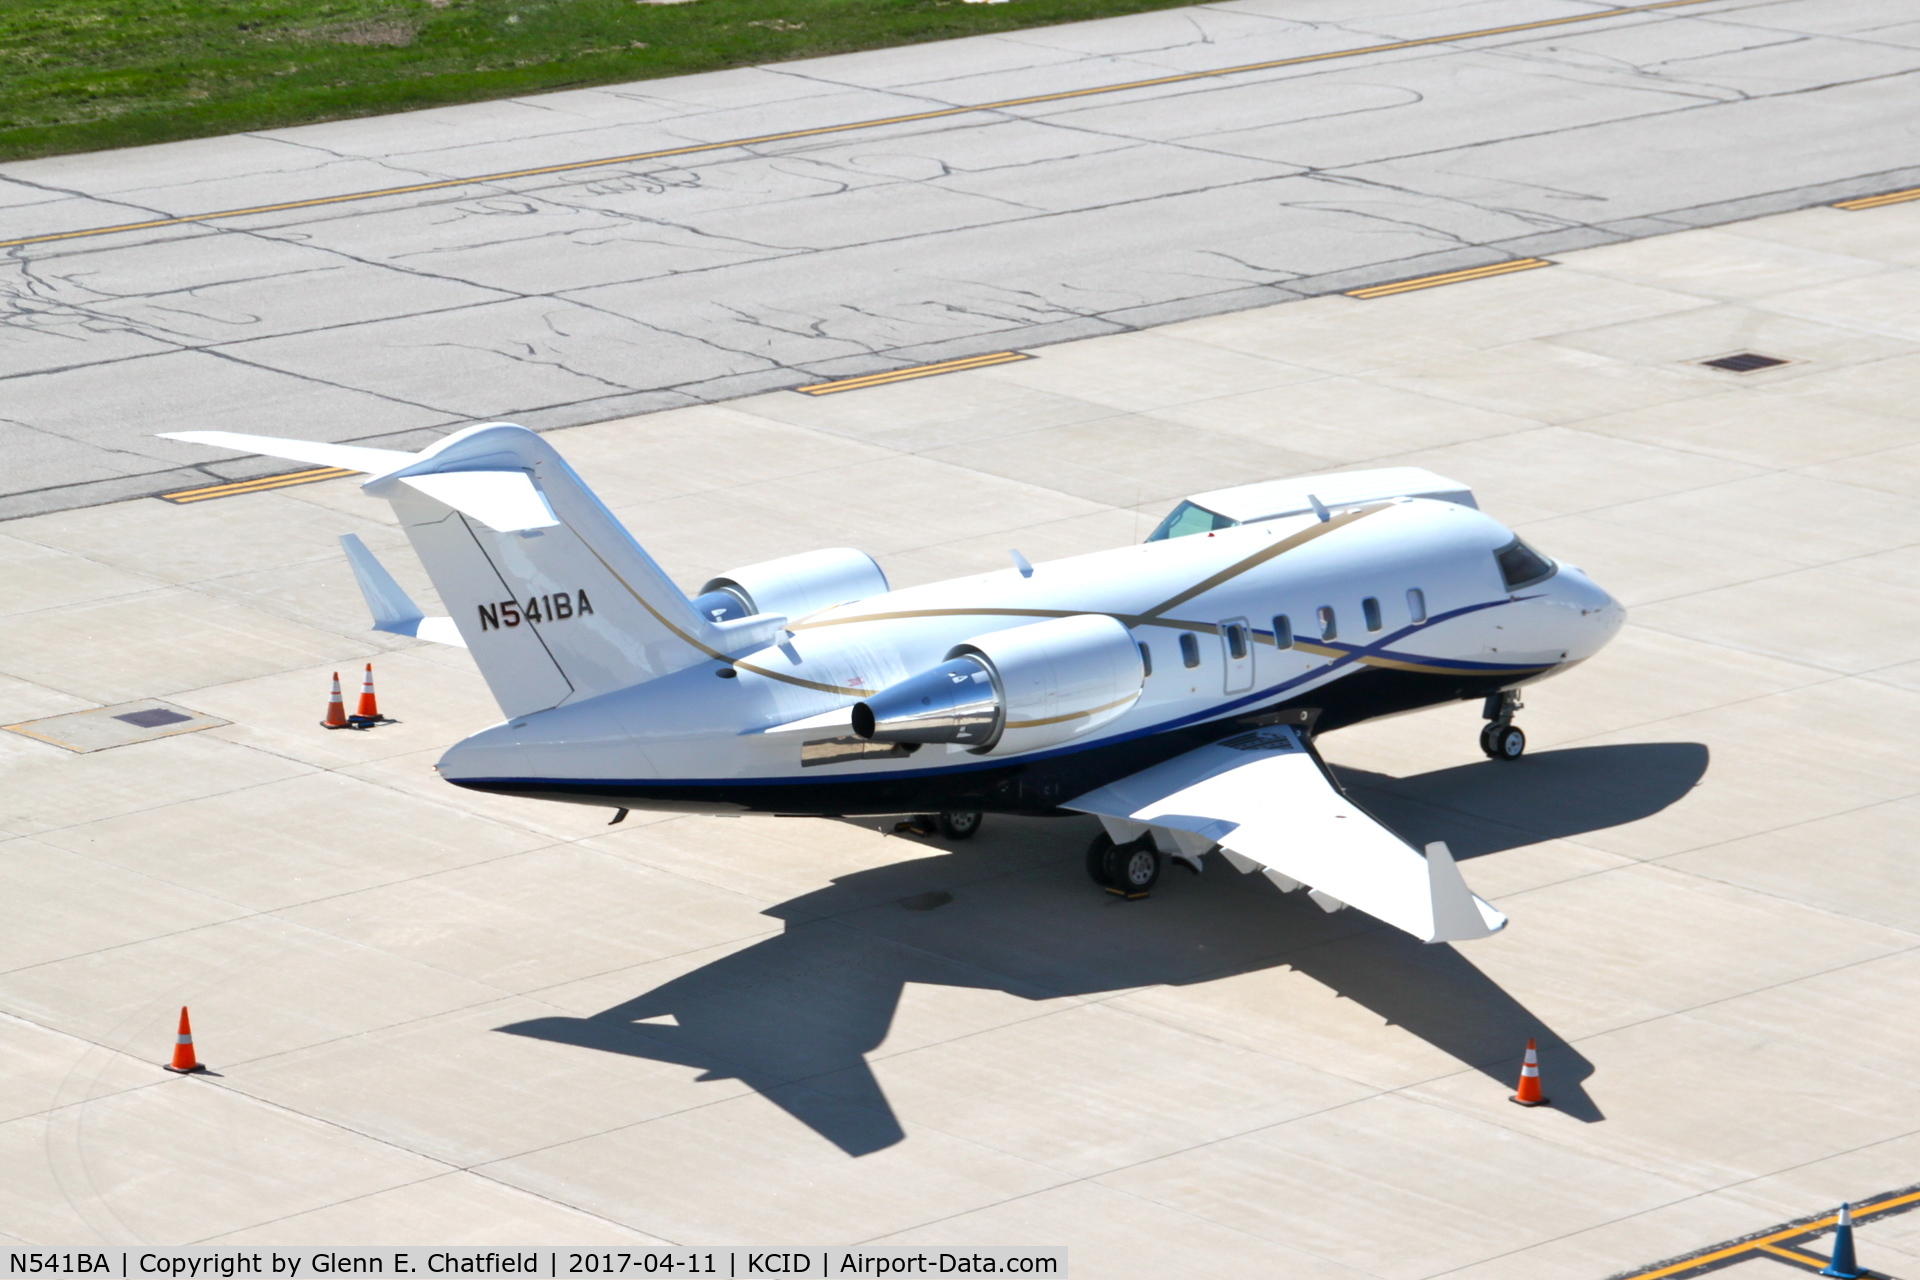 N541BA, 2015 Bombardier Challenger 650 (CL-600-2B16) C/N 6060, Shot from an office of the control tower